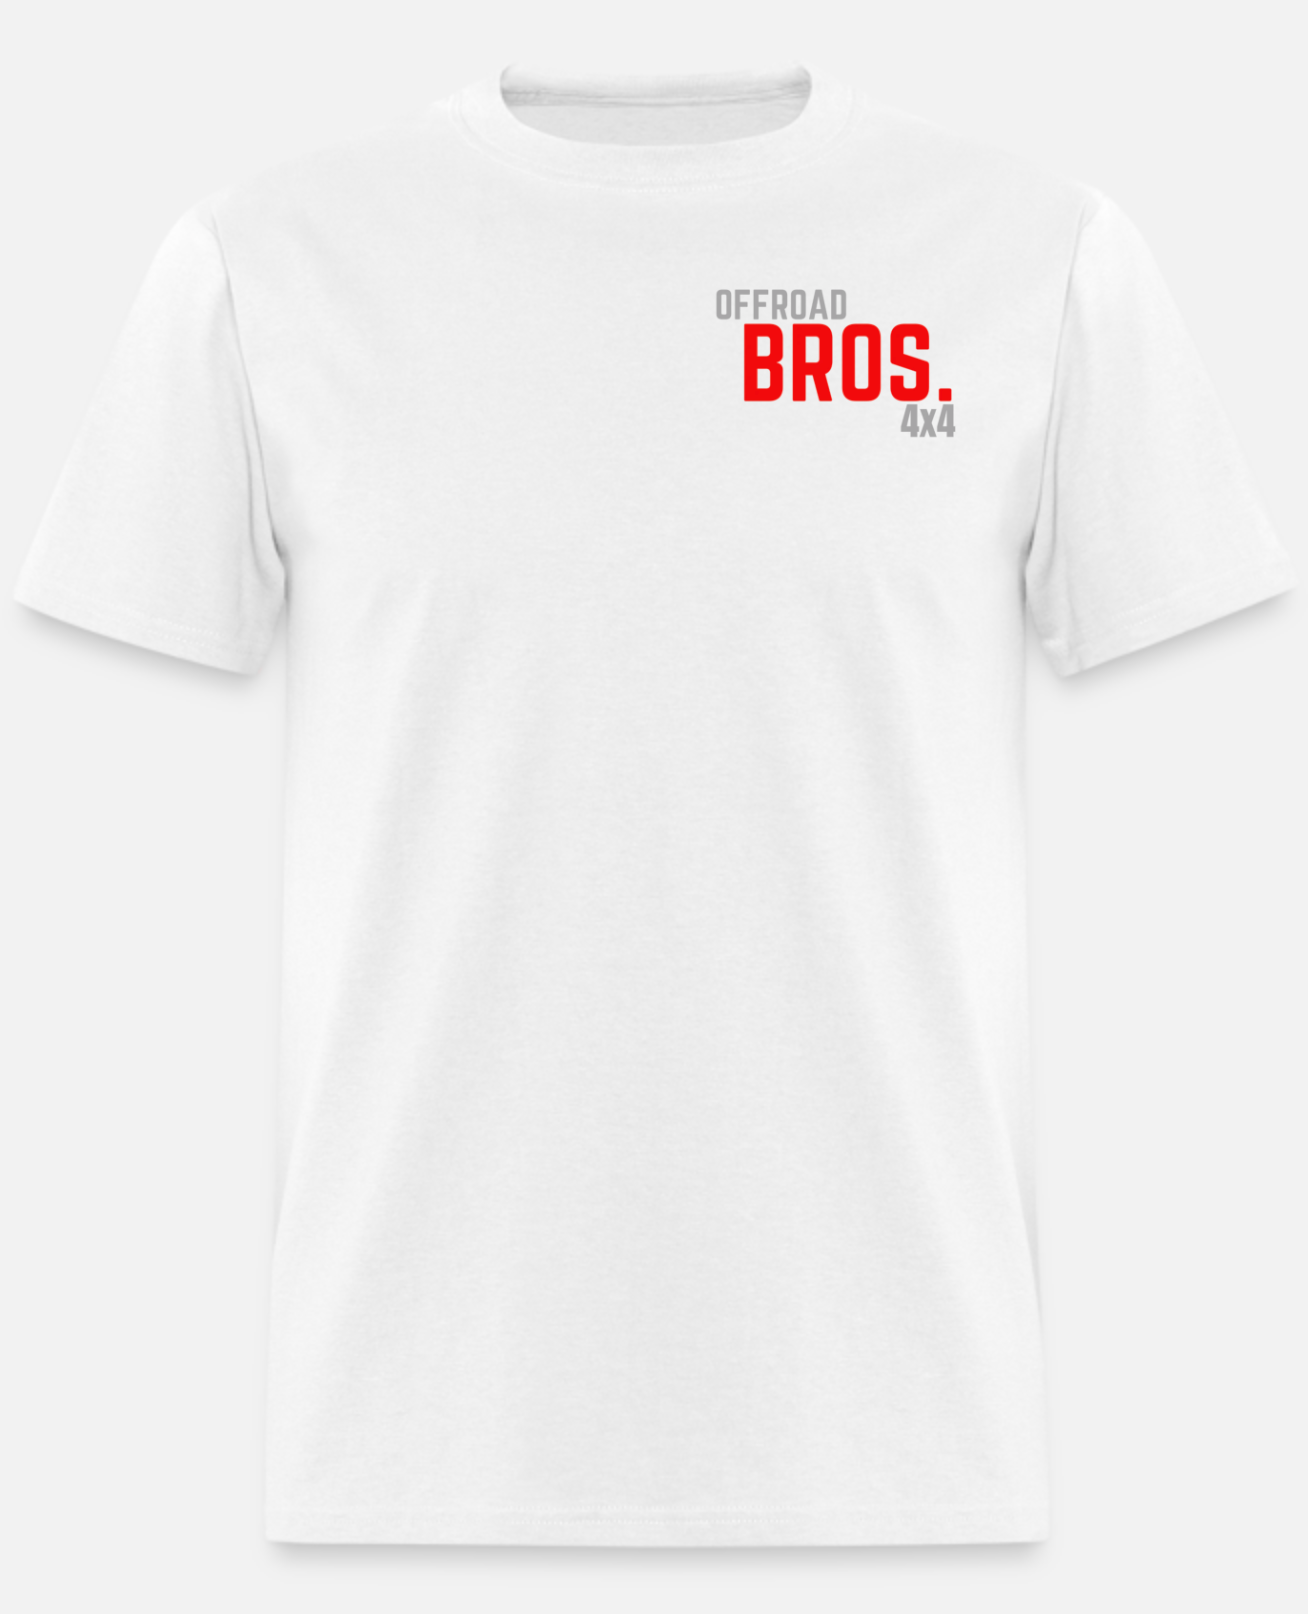 WHITE T-SHIRT #1 BY OFFROAD BROS. 4X4